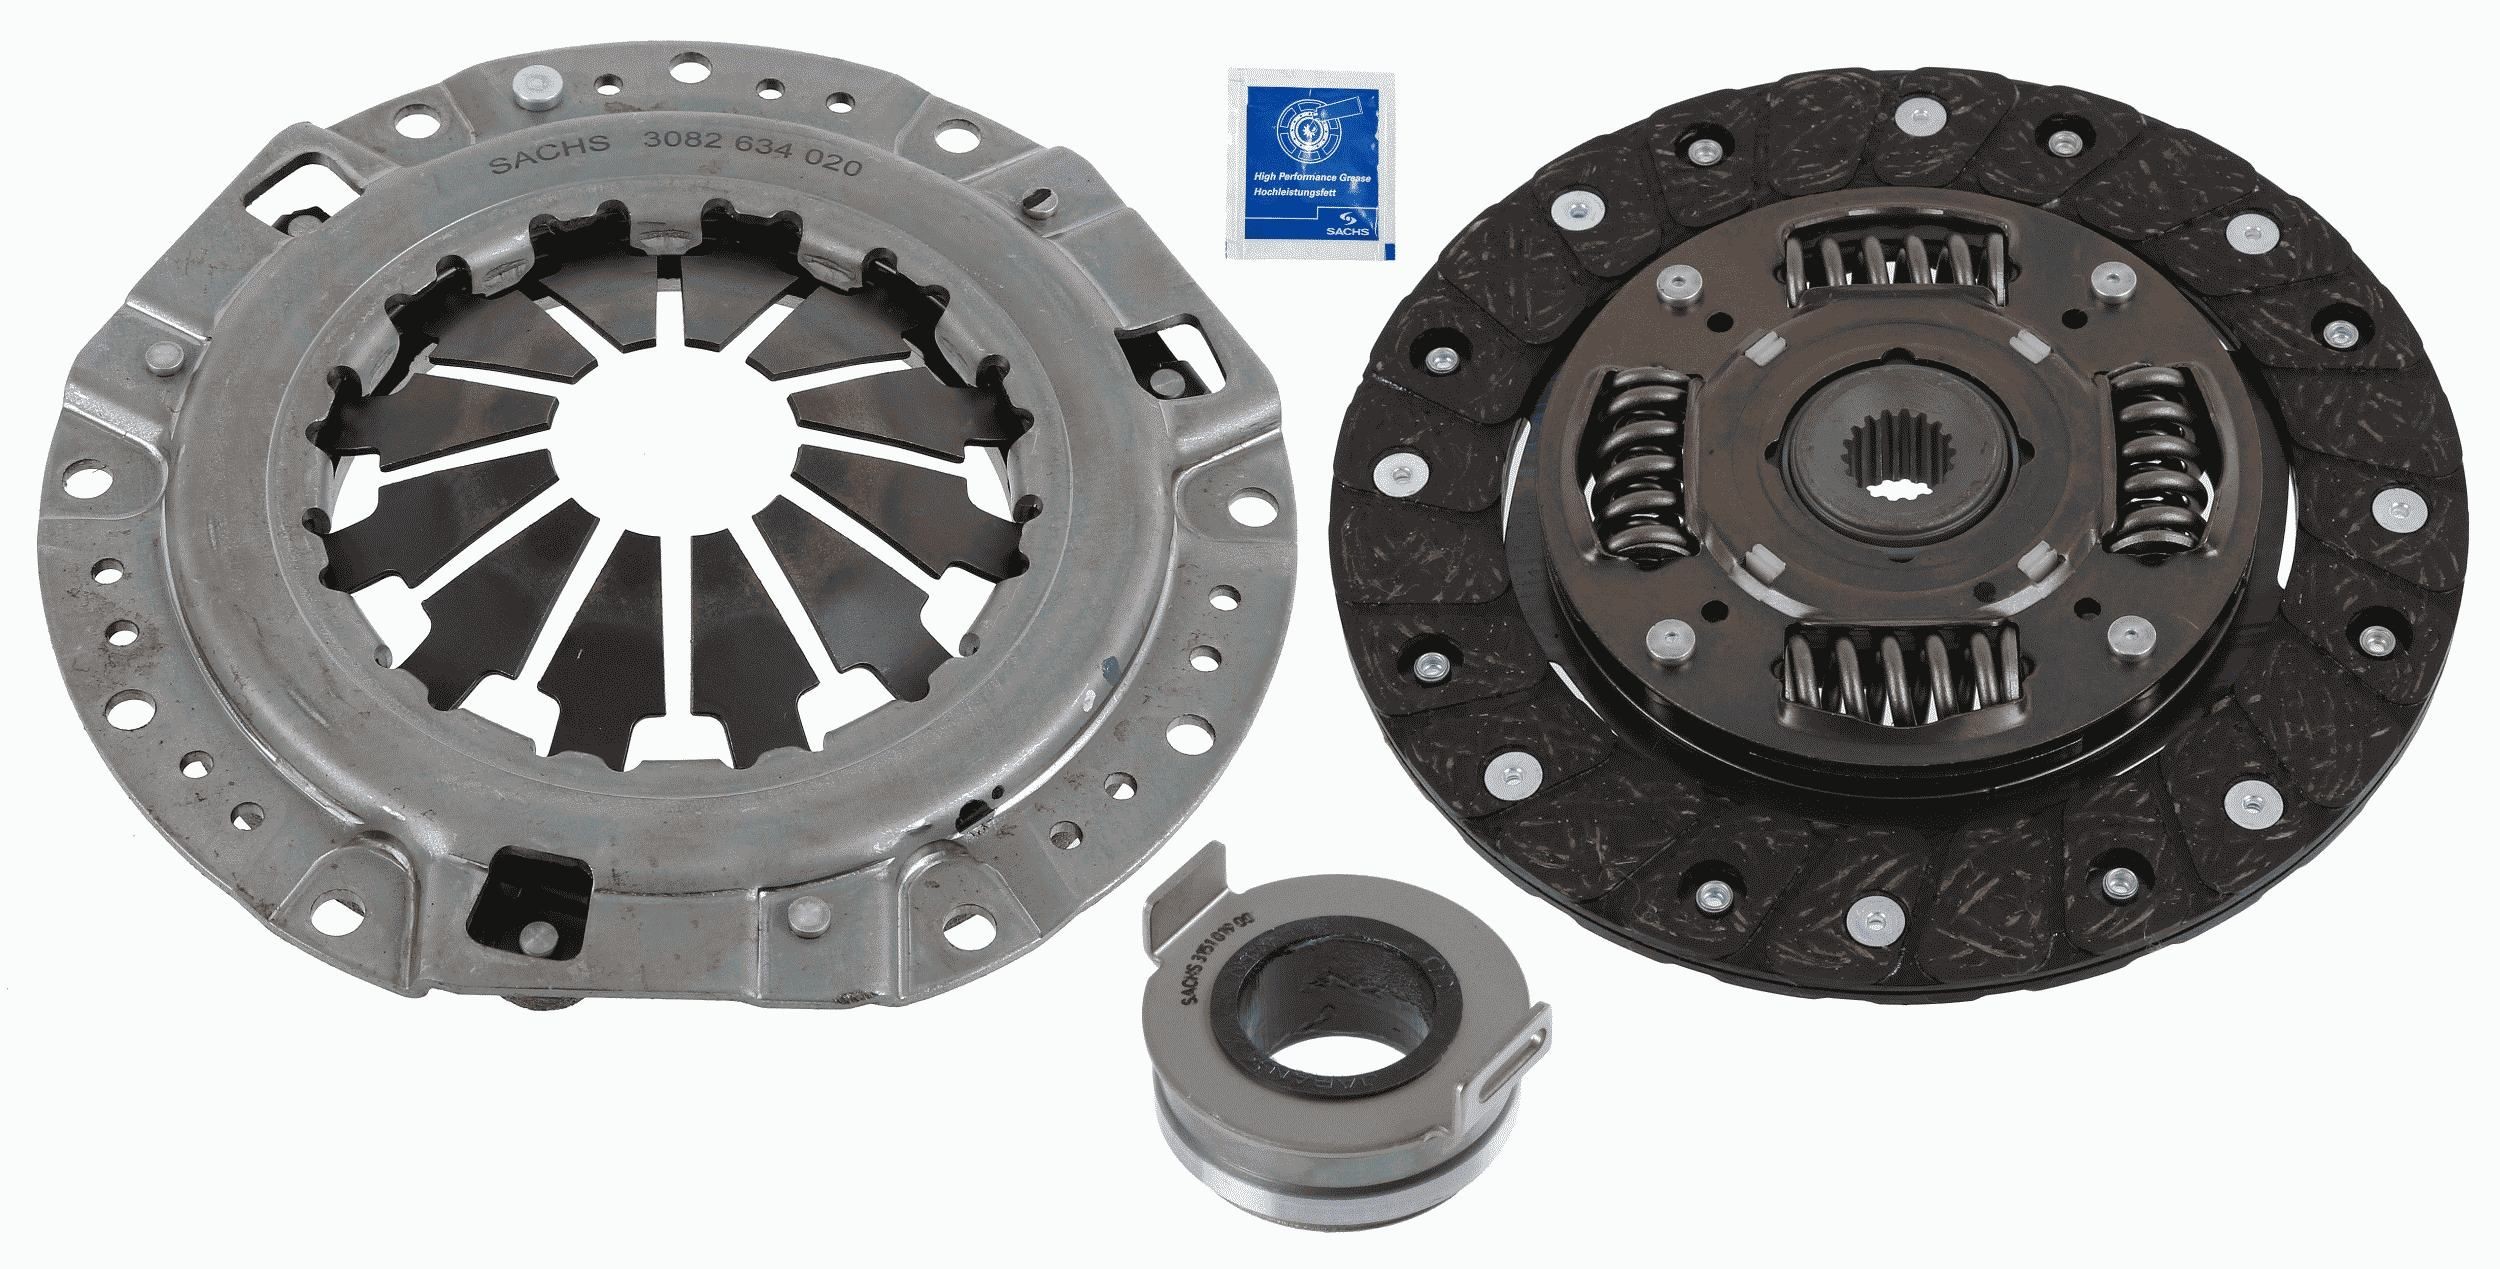 Original SACHS Clutch and flywheel kit 3000 951 618 for NISSAN TRADE